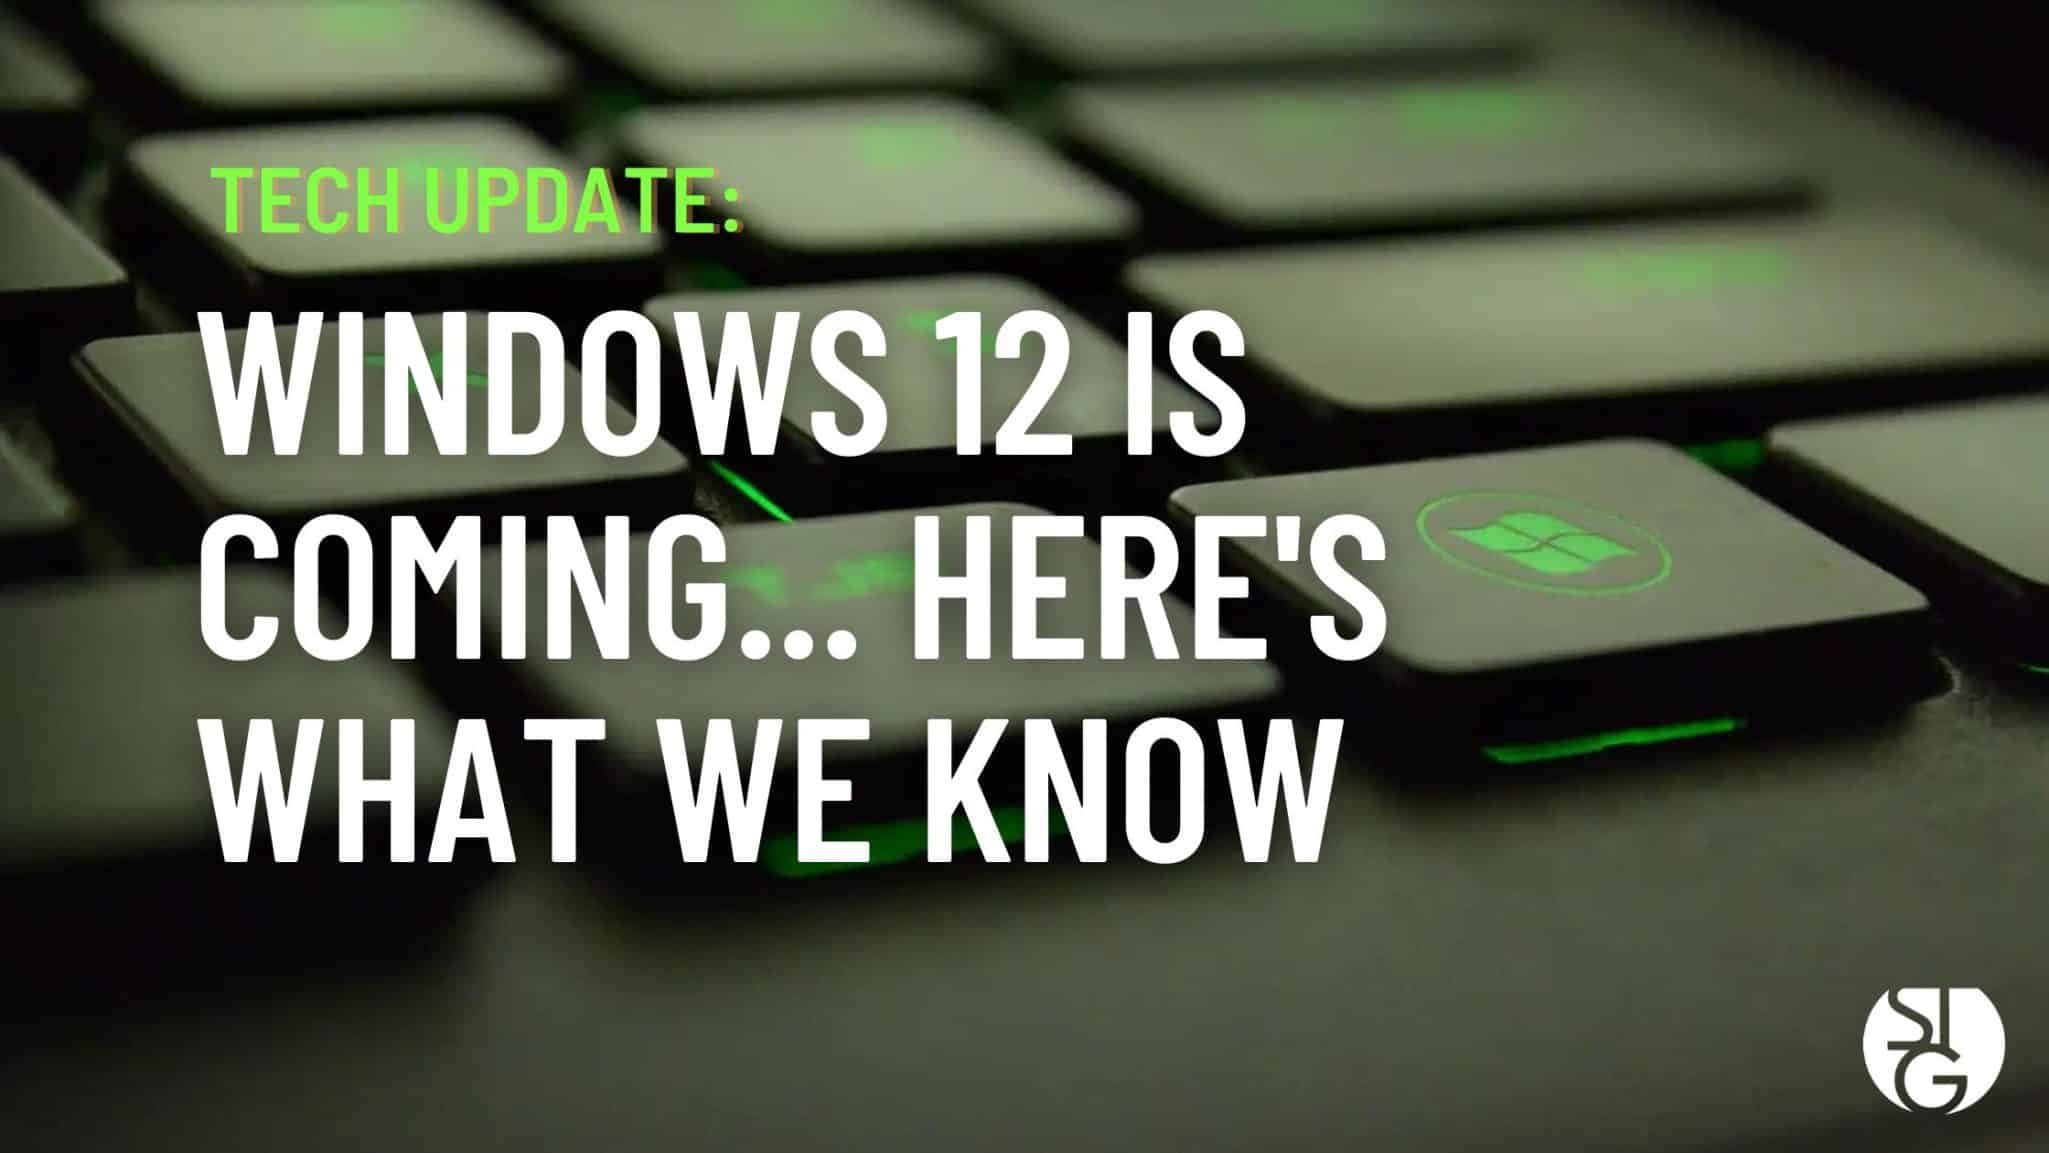 Windows 12 is Coming, Here's What We Know